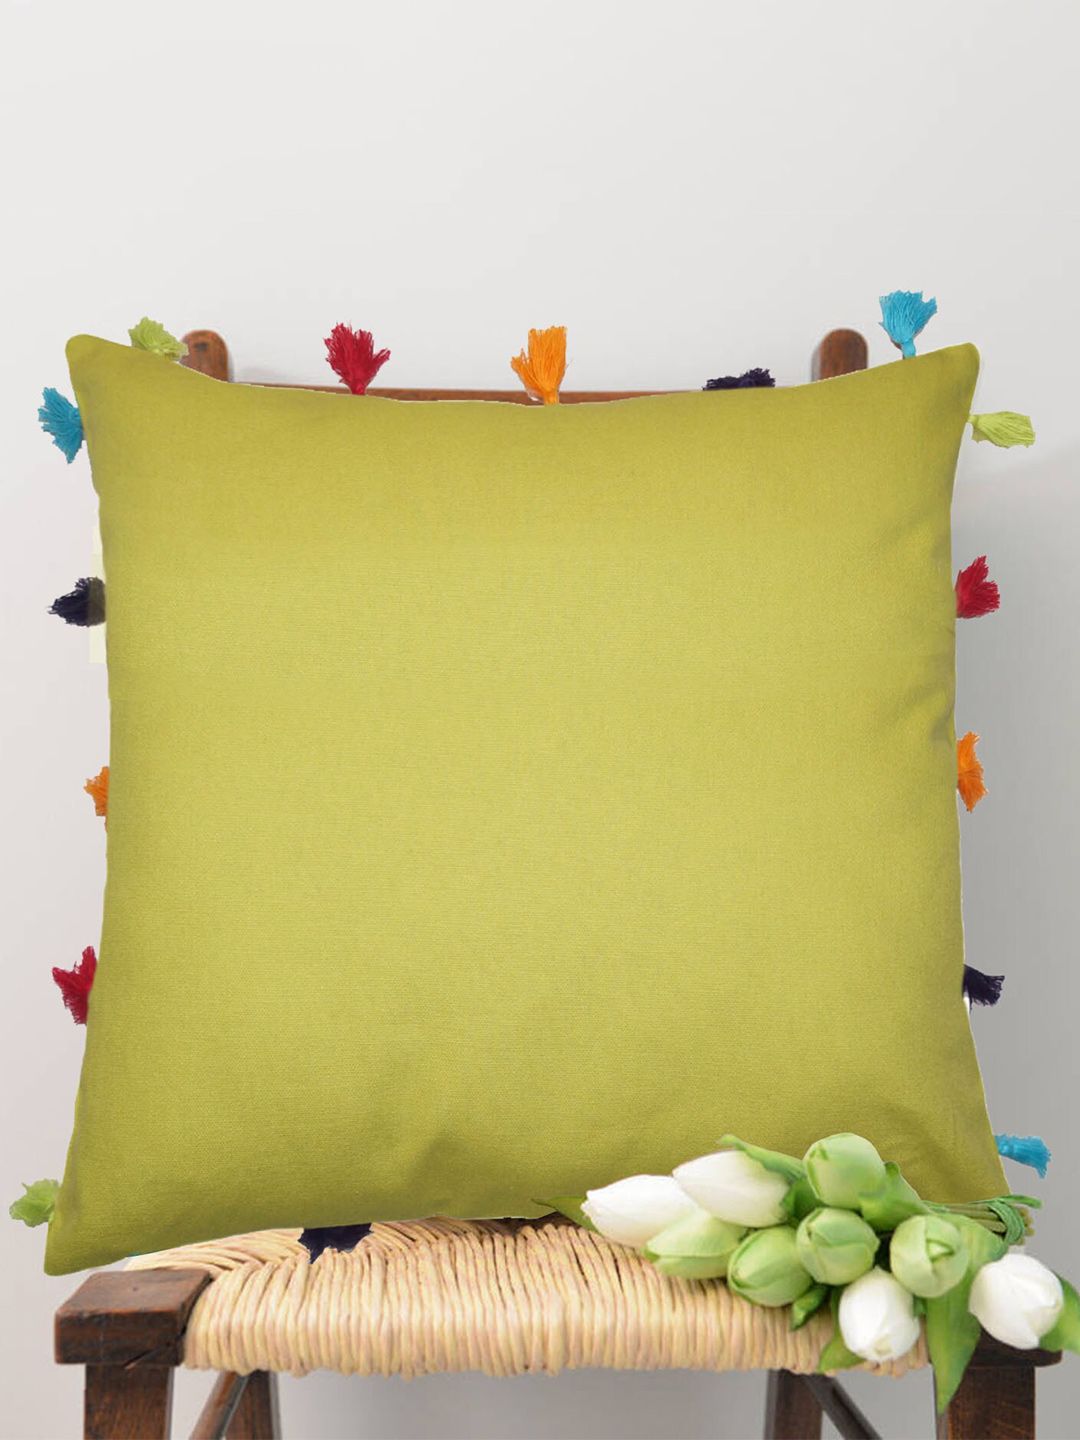 Lushomes Yellow Set of 3 Square Cushion Covers with Tassels Price in India